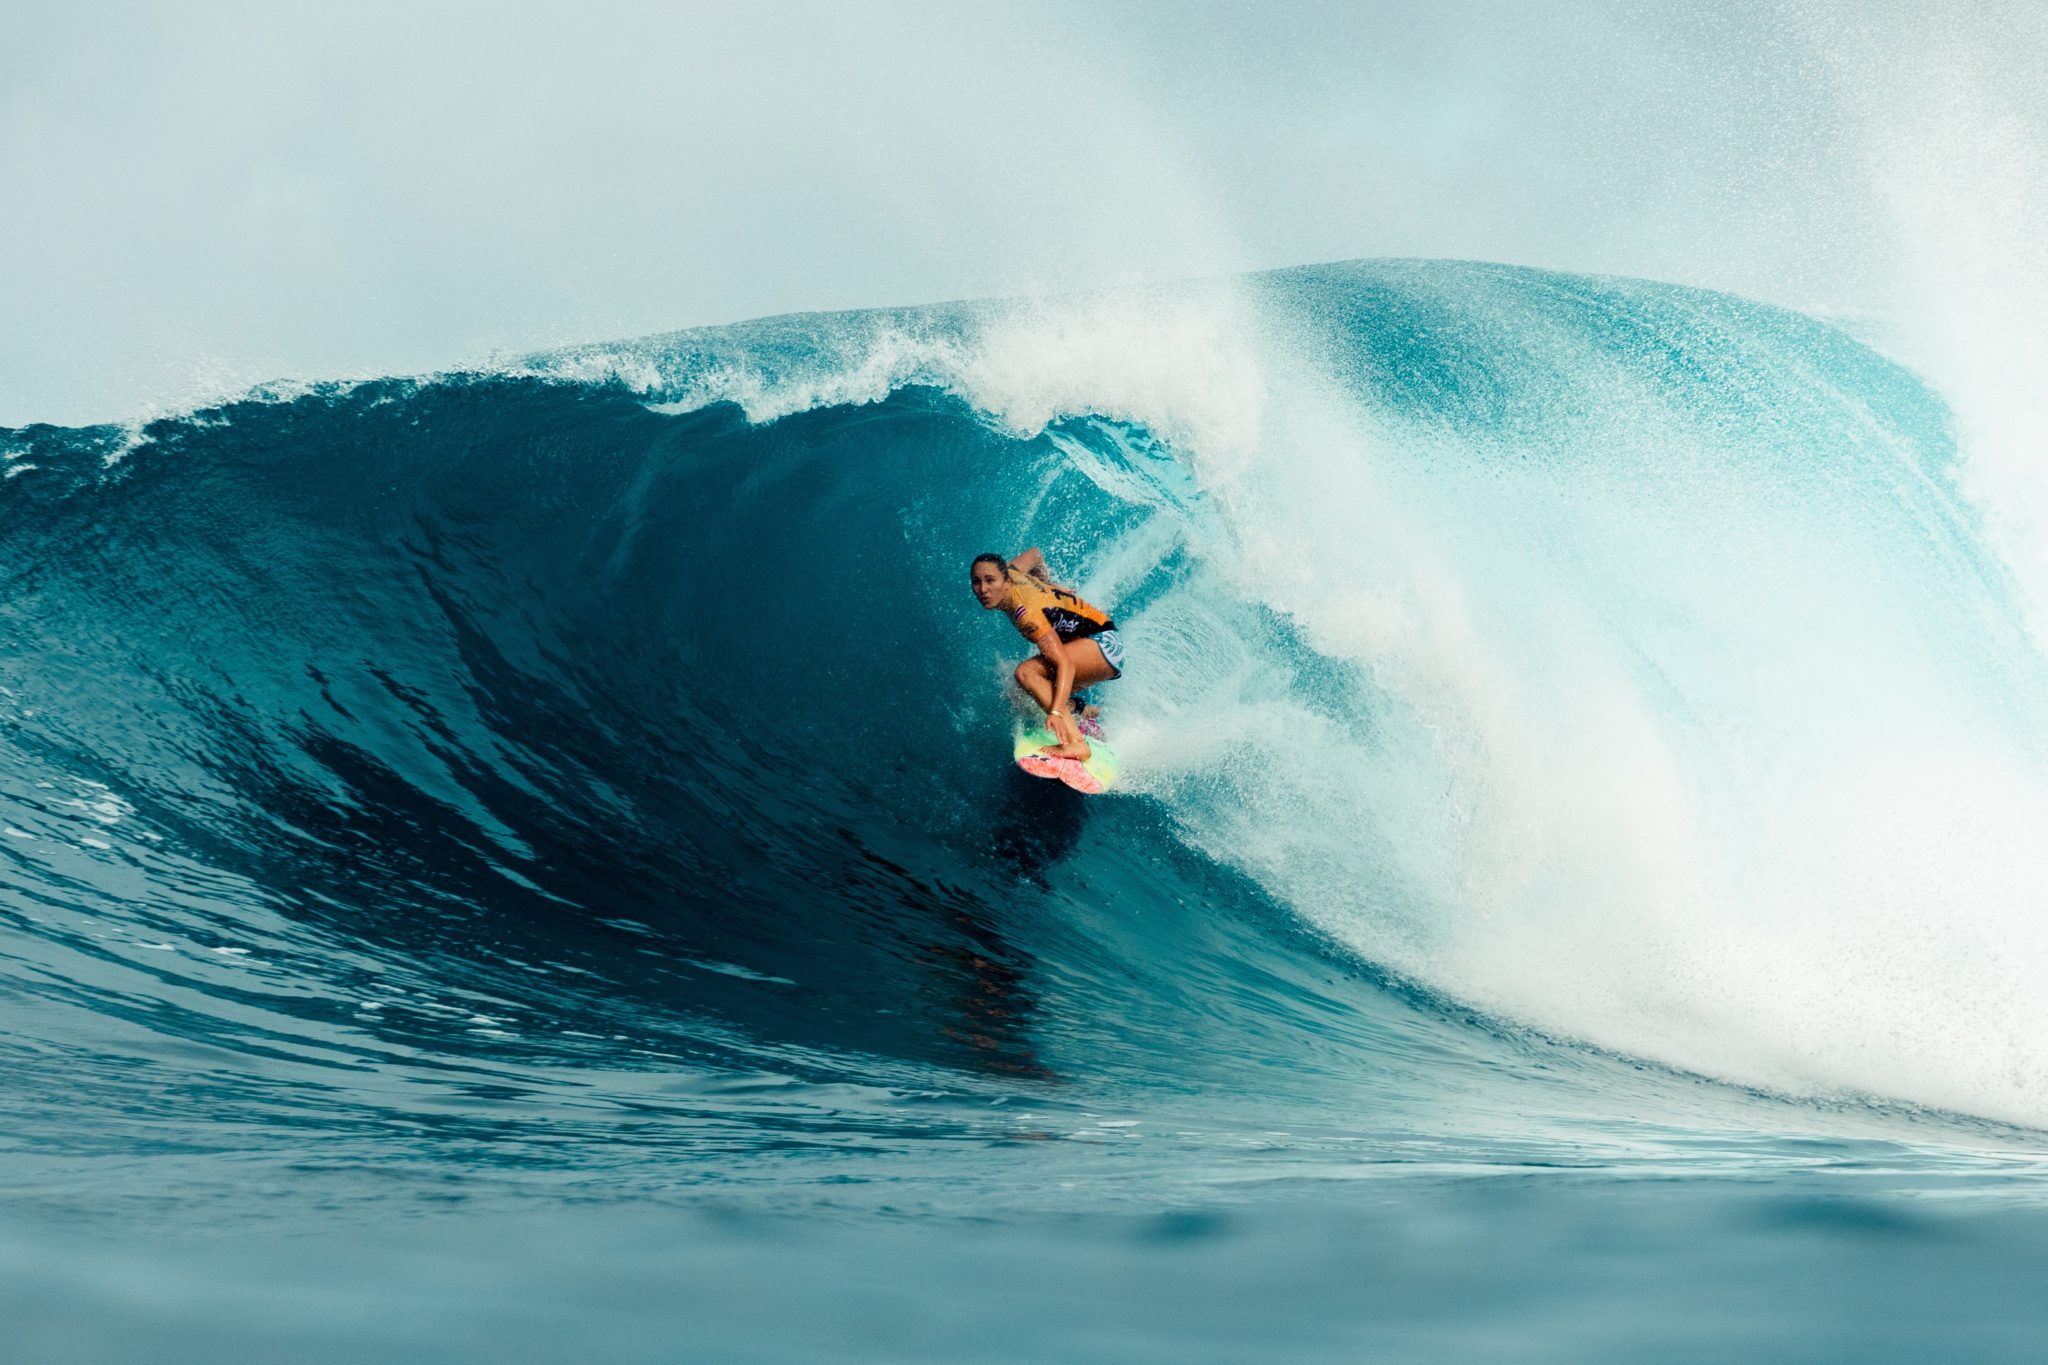 Carissa Moore
(Cat Miers / WSL via Getty Images)